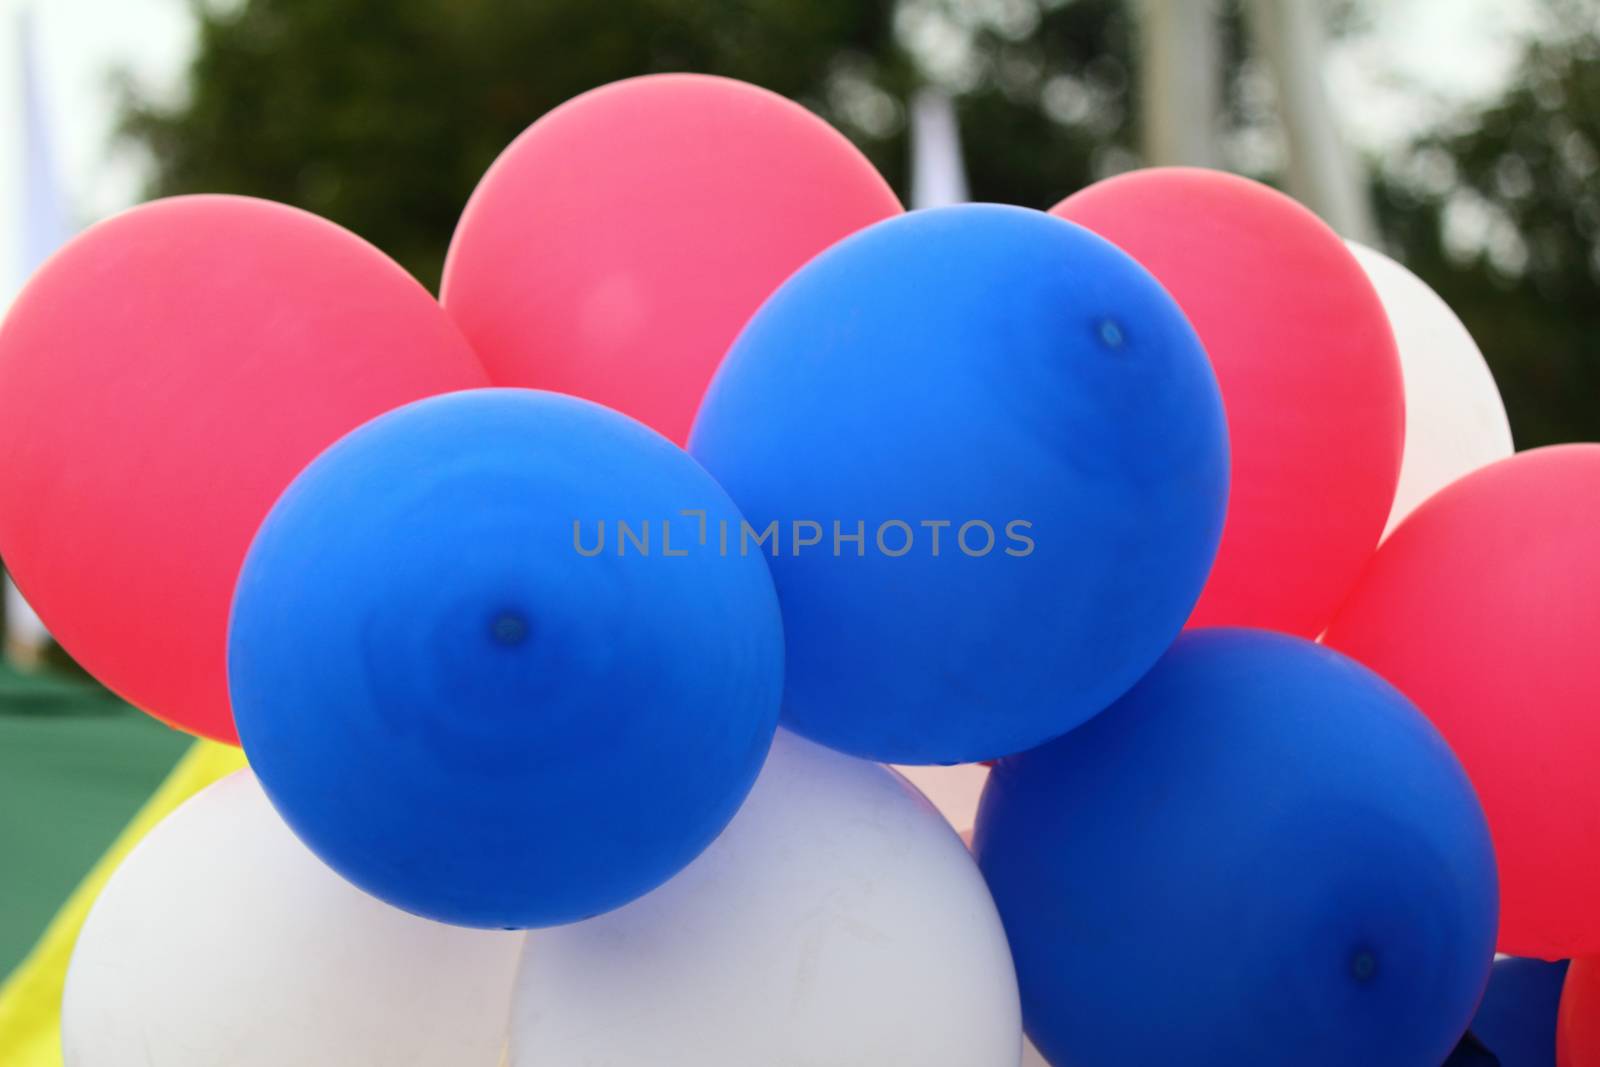 Beautiful, bright, red and blue air balloons, filled with gas and tied together.